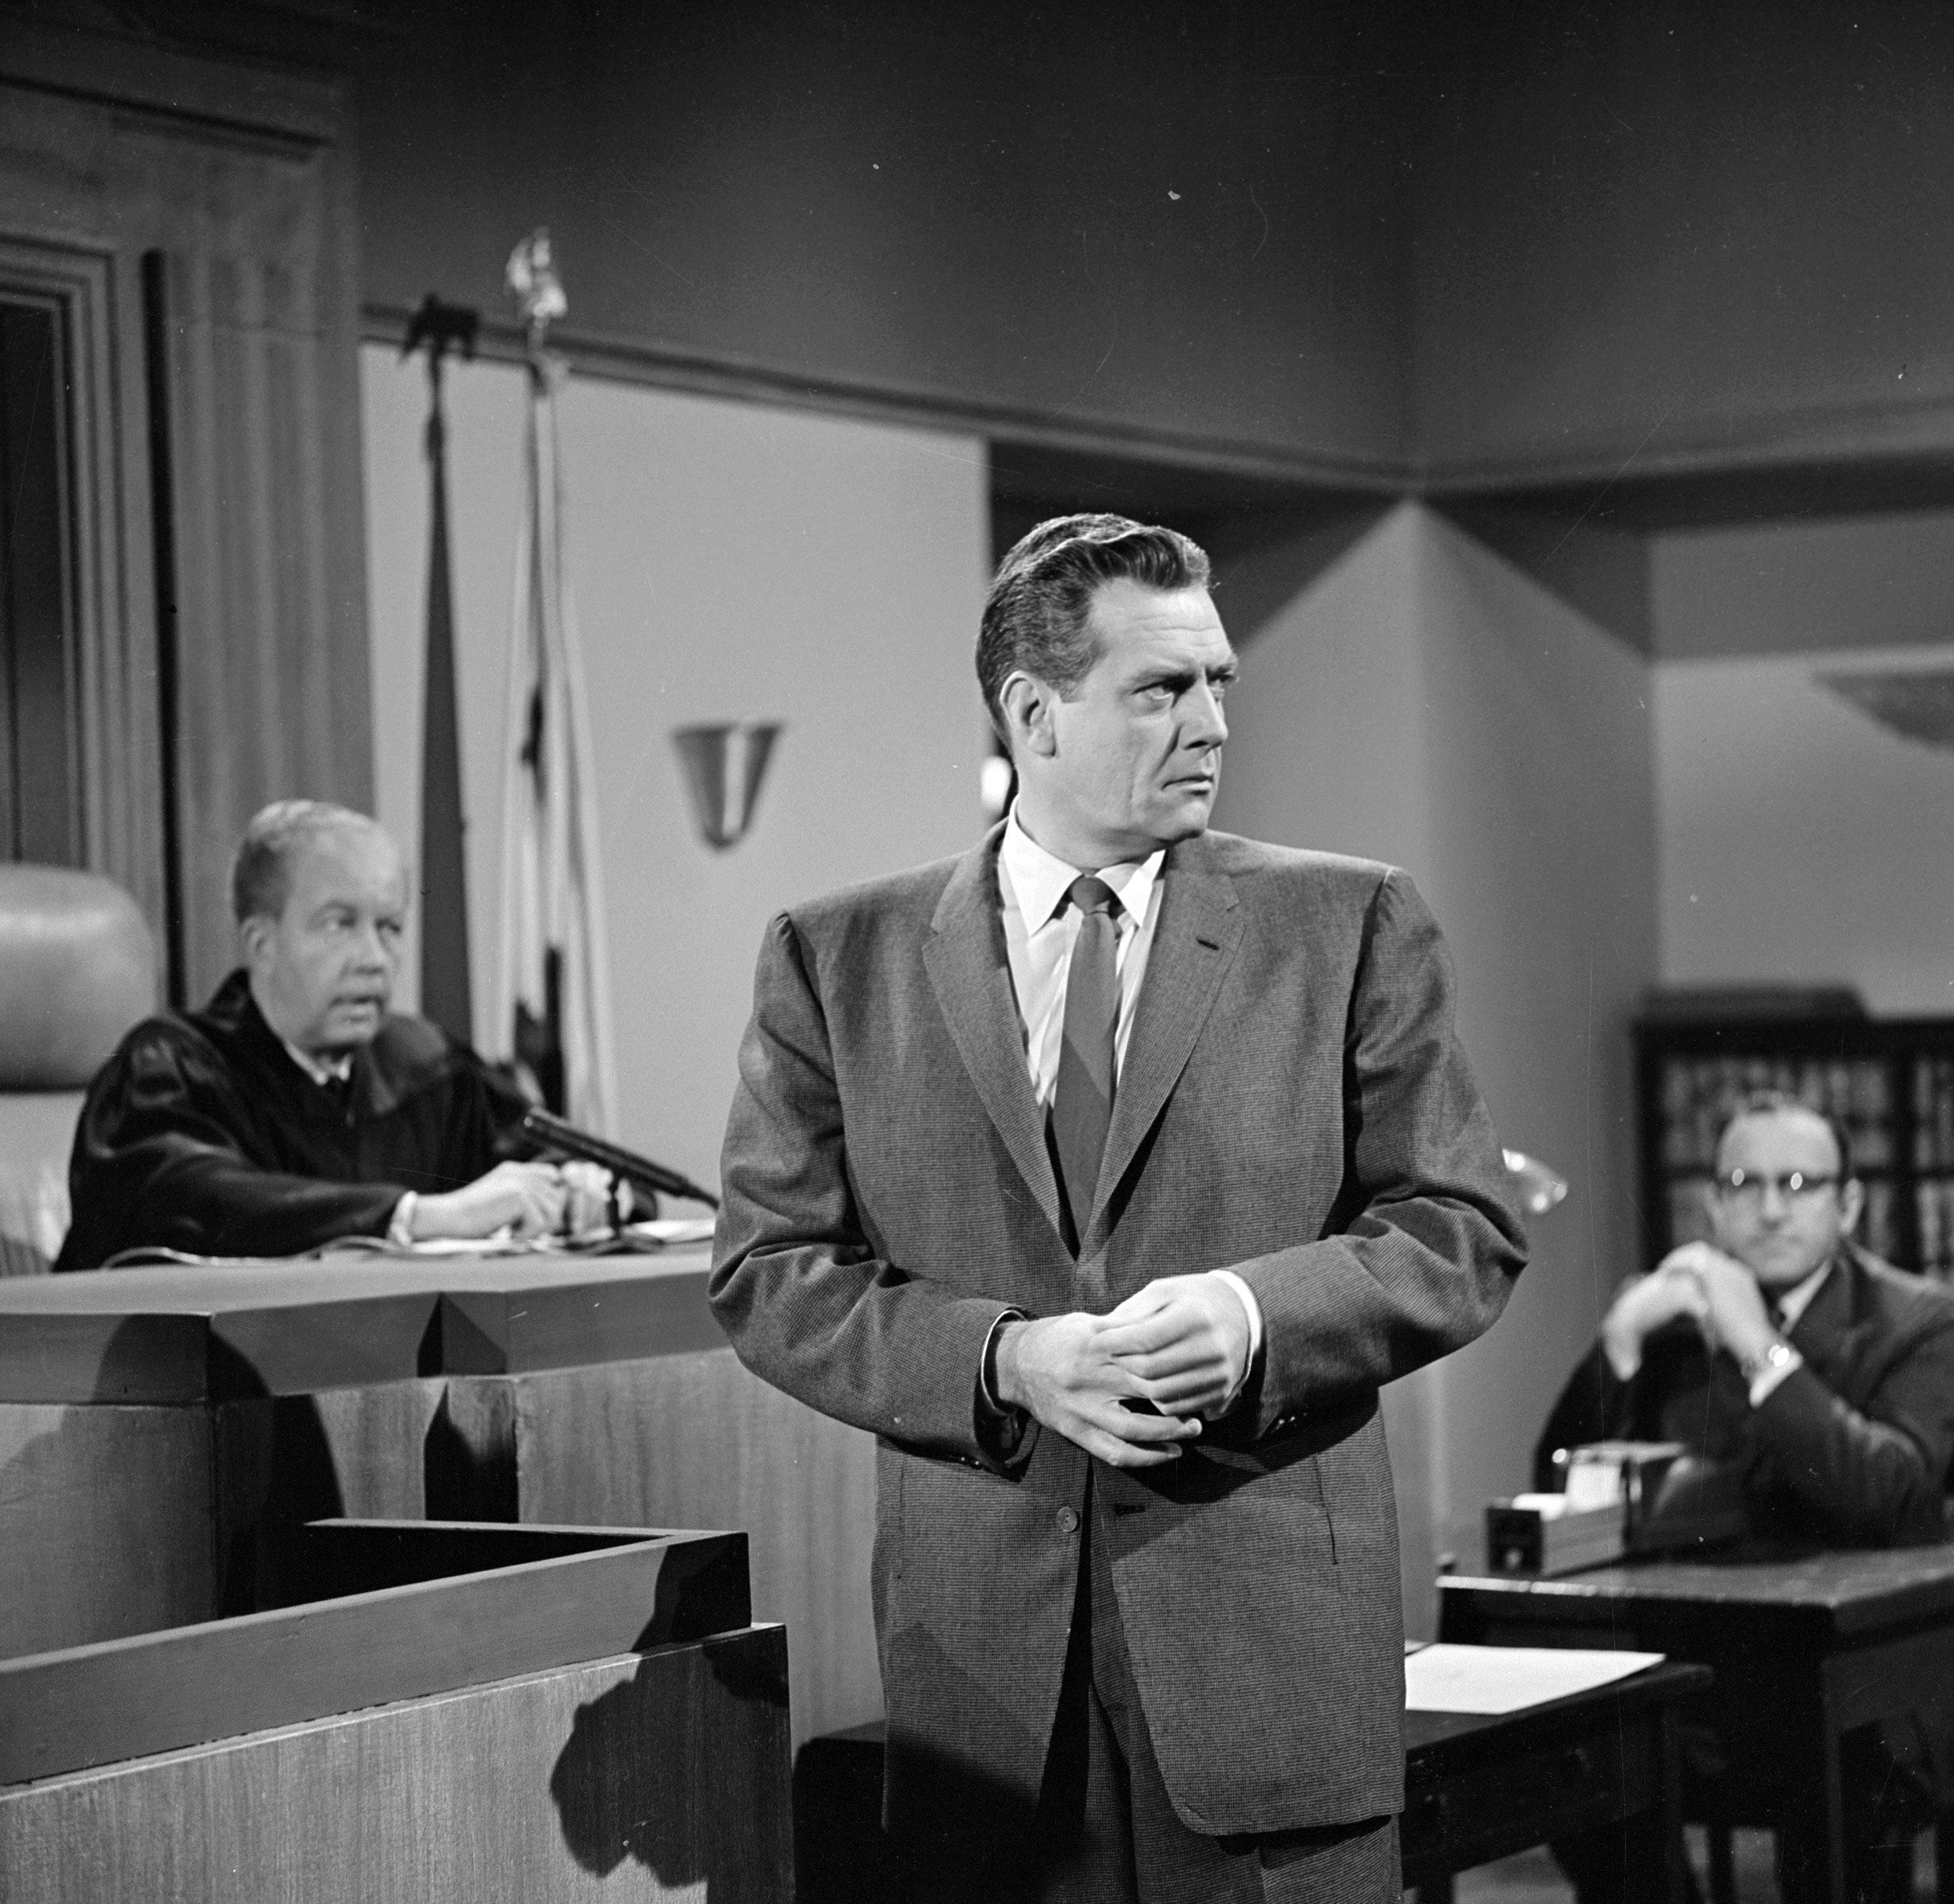 Actors Lewis Martin as Judge Libott and Raymond Burr as Perry Mason perform in a courtroom scene in an episode of the TV series "Perry Mason" on November 13, 1961. | Source: Getty Images